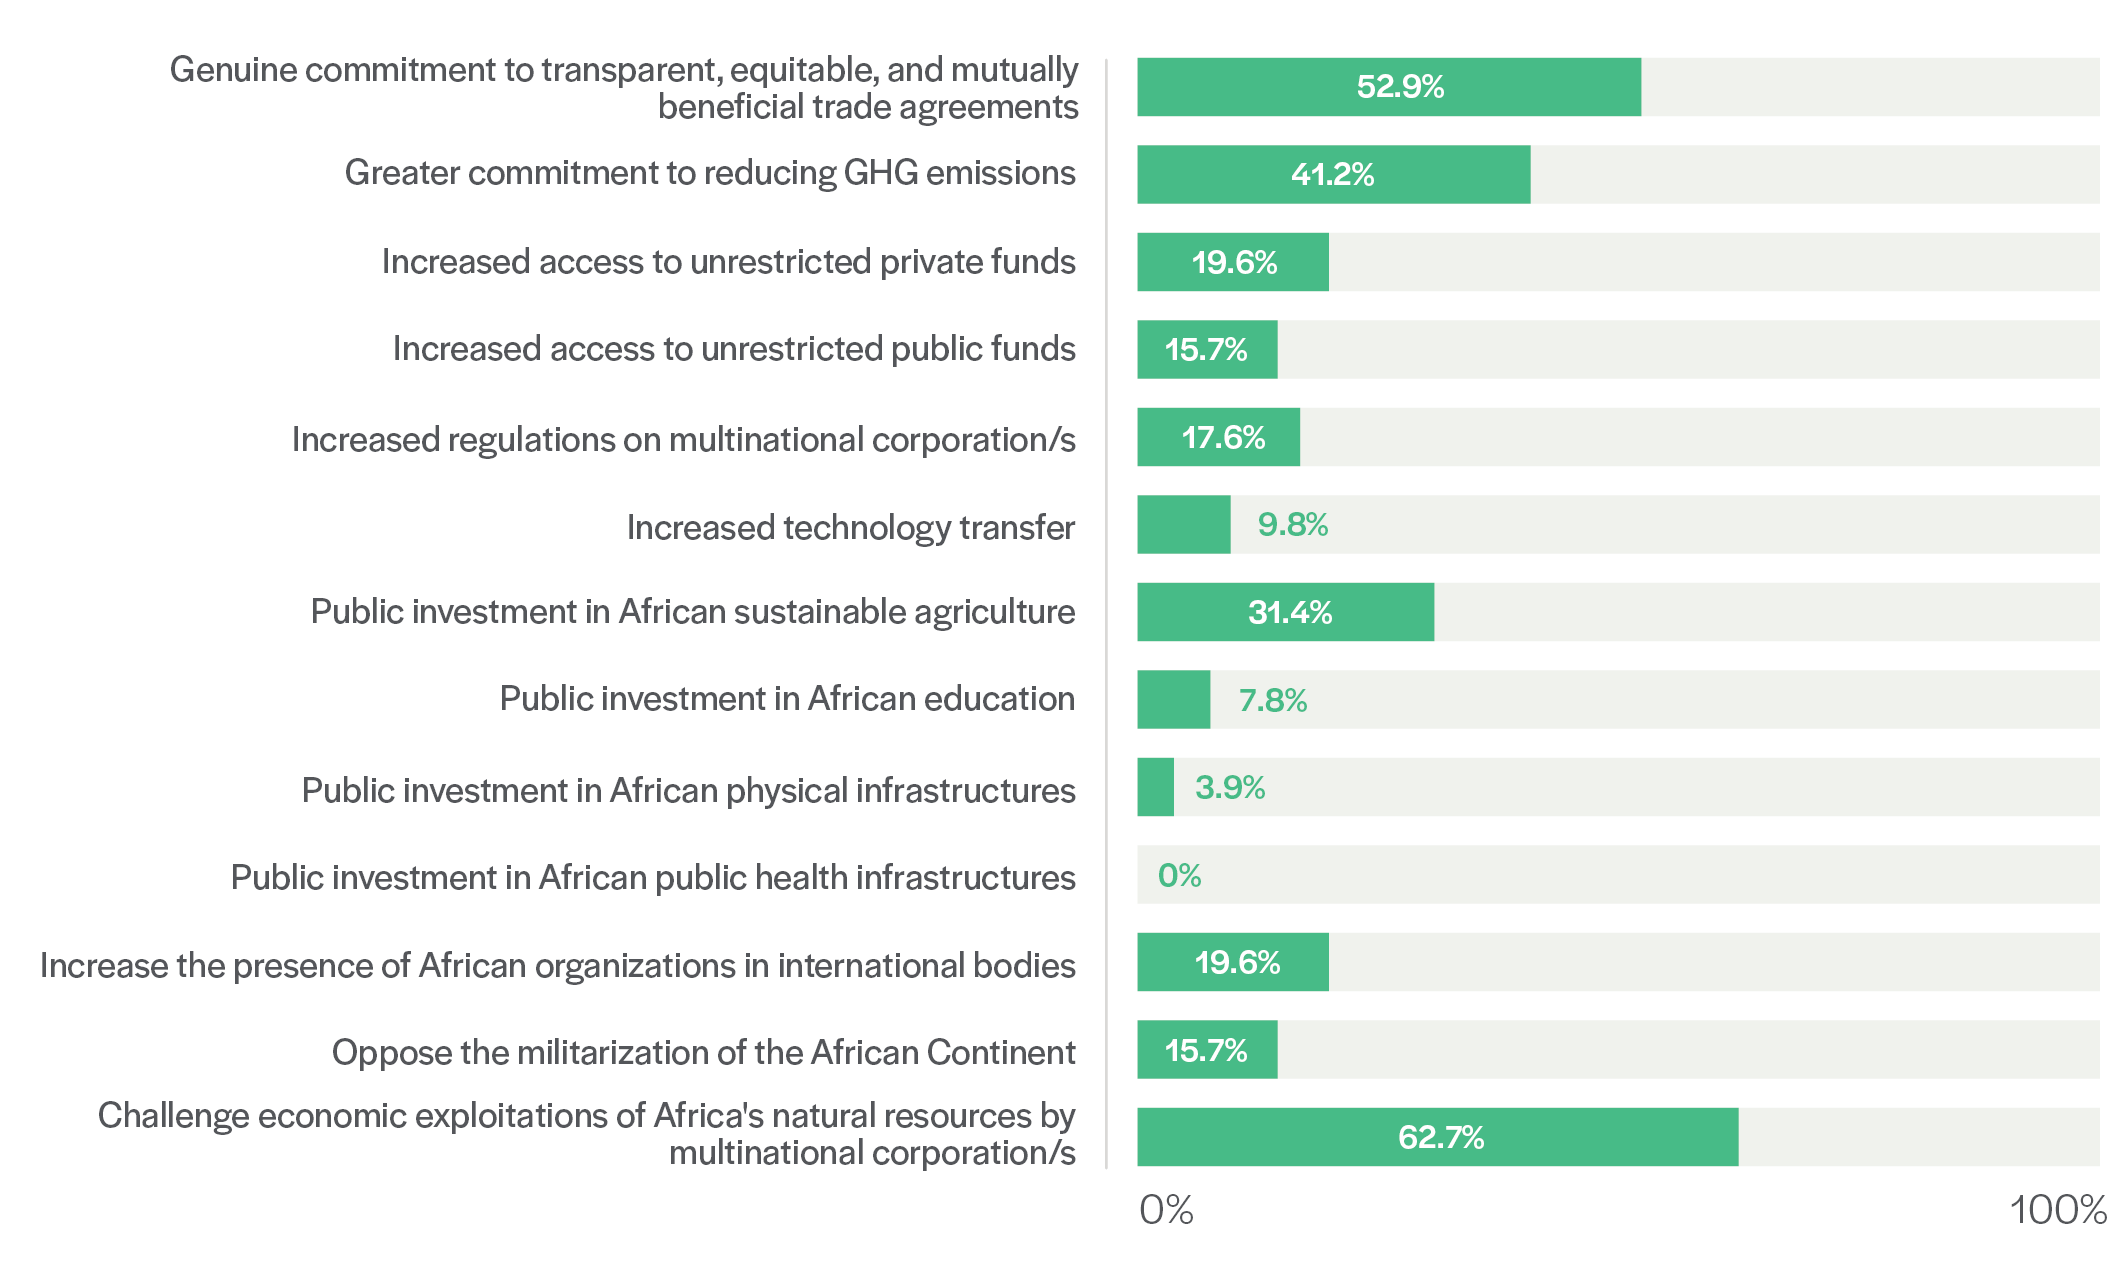 Bar graph depicting demands and requests of African organizations for Global North orgs